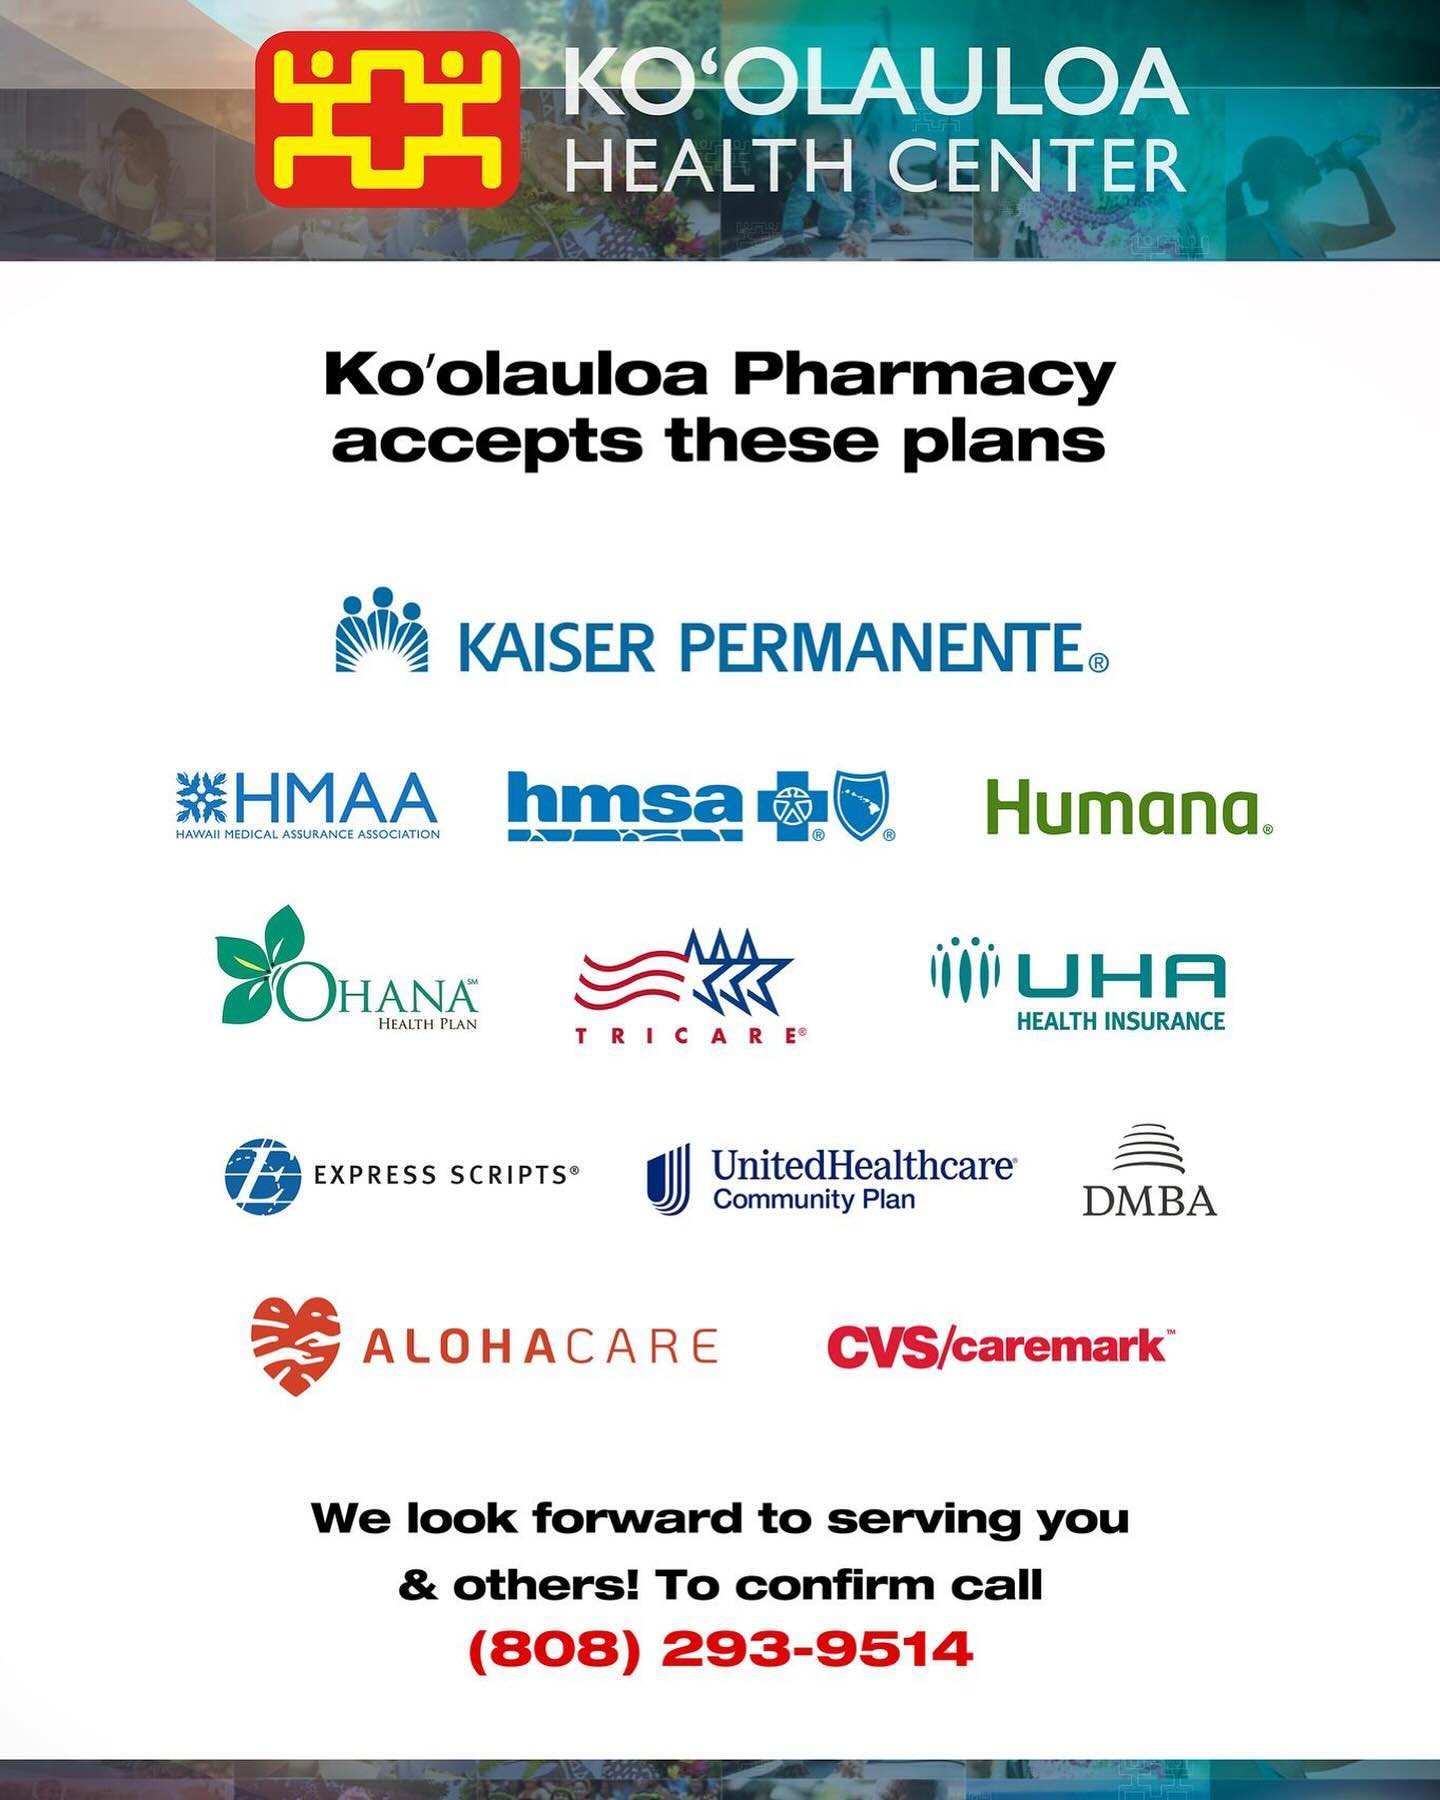 Aloha &lsquo;Ohana!

Do you recognize any of these logos? If you do these are the drug plans that are accepted at Ko&rsquo;olauloa Pharmacy:

We look forward to serving you.

Call (808) 293-9514 or visit www.koolauloachc.org for more information.

#b